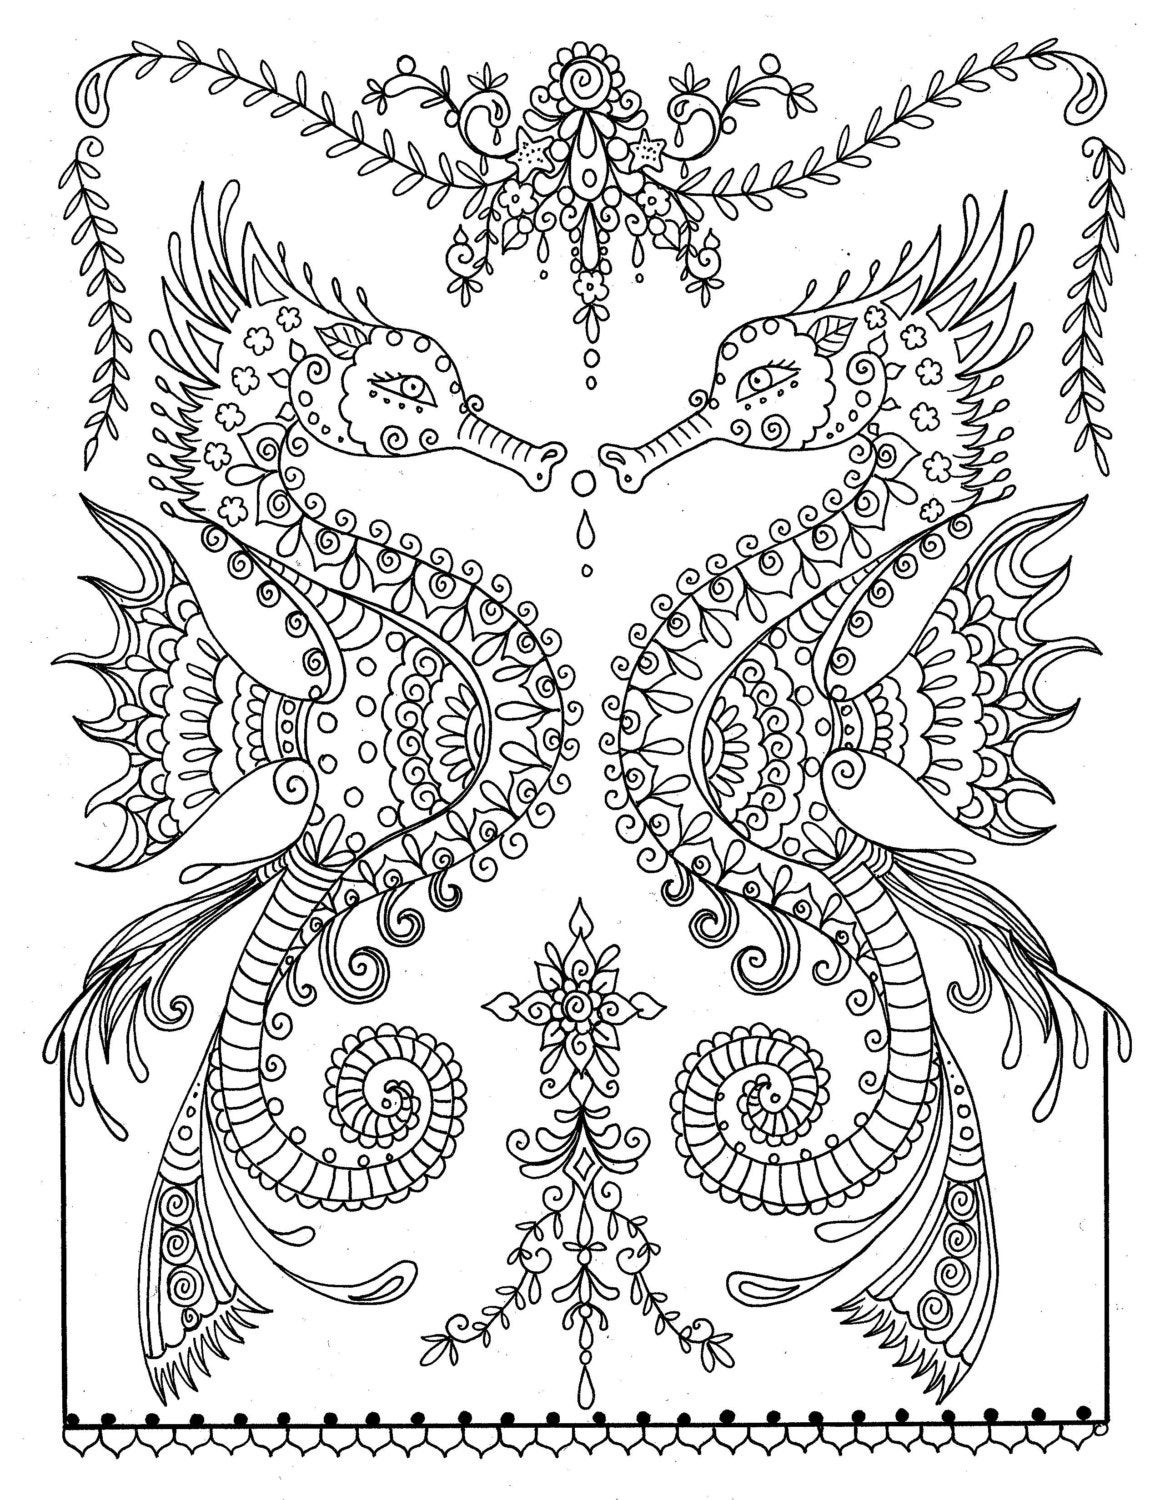 Ocean Coloring Pages For Adults
 Printable Sea Horse Coloring Page Instant Download Adult